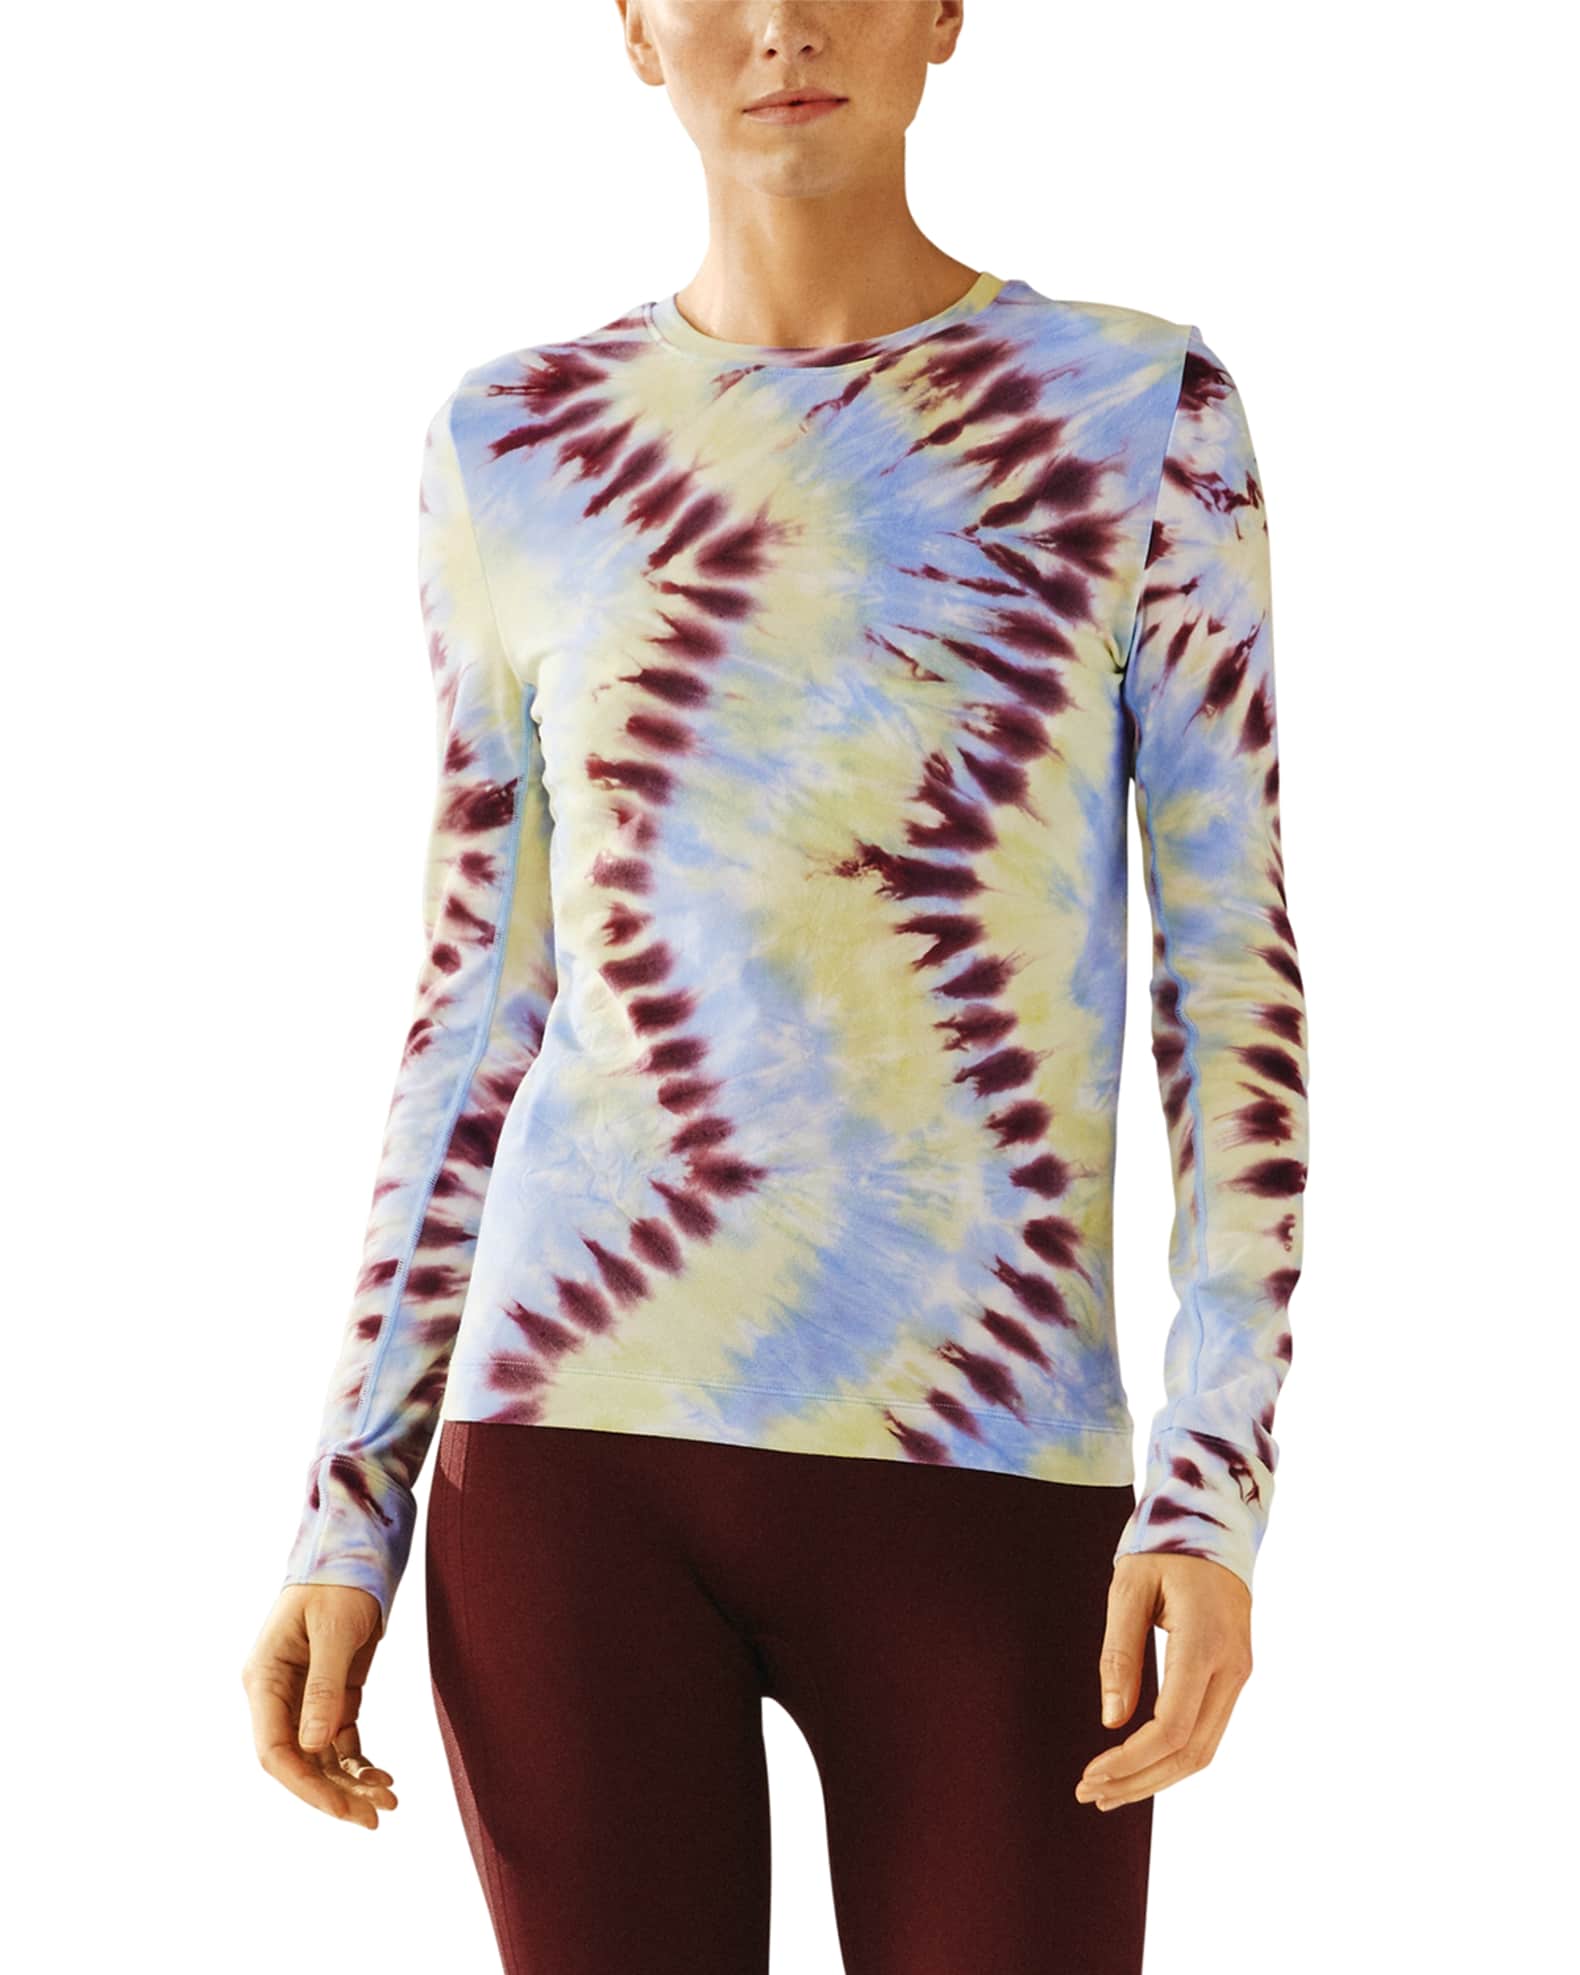 Seamless Tie-Dye Leggings and Matching Items | Neiman Marcus